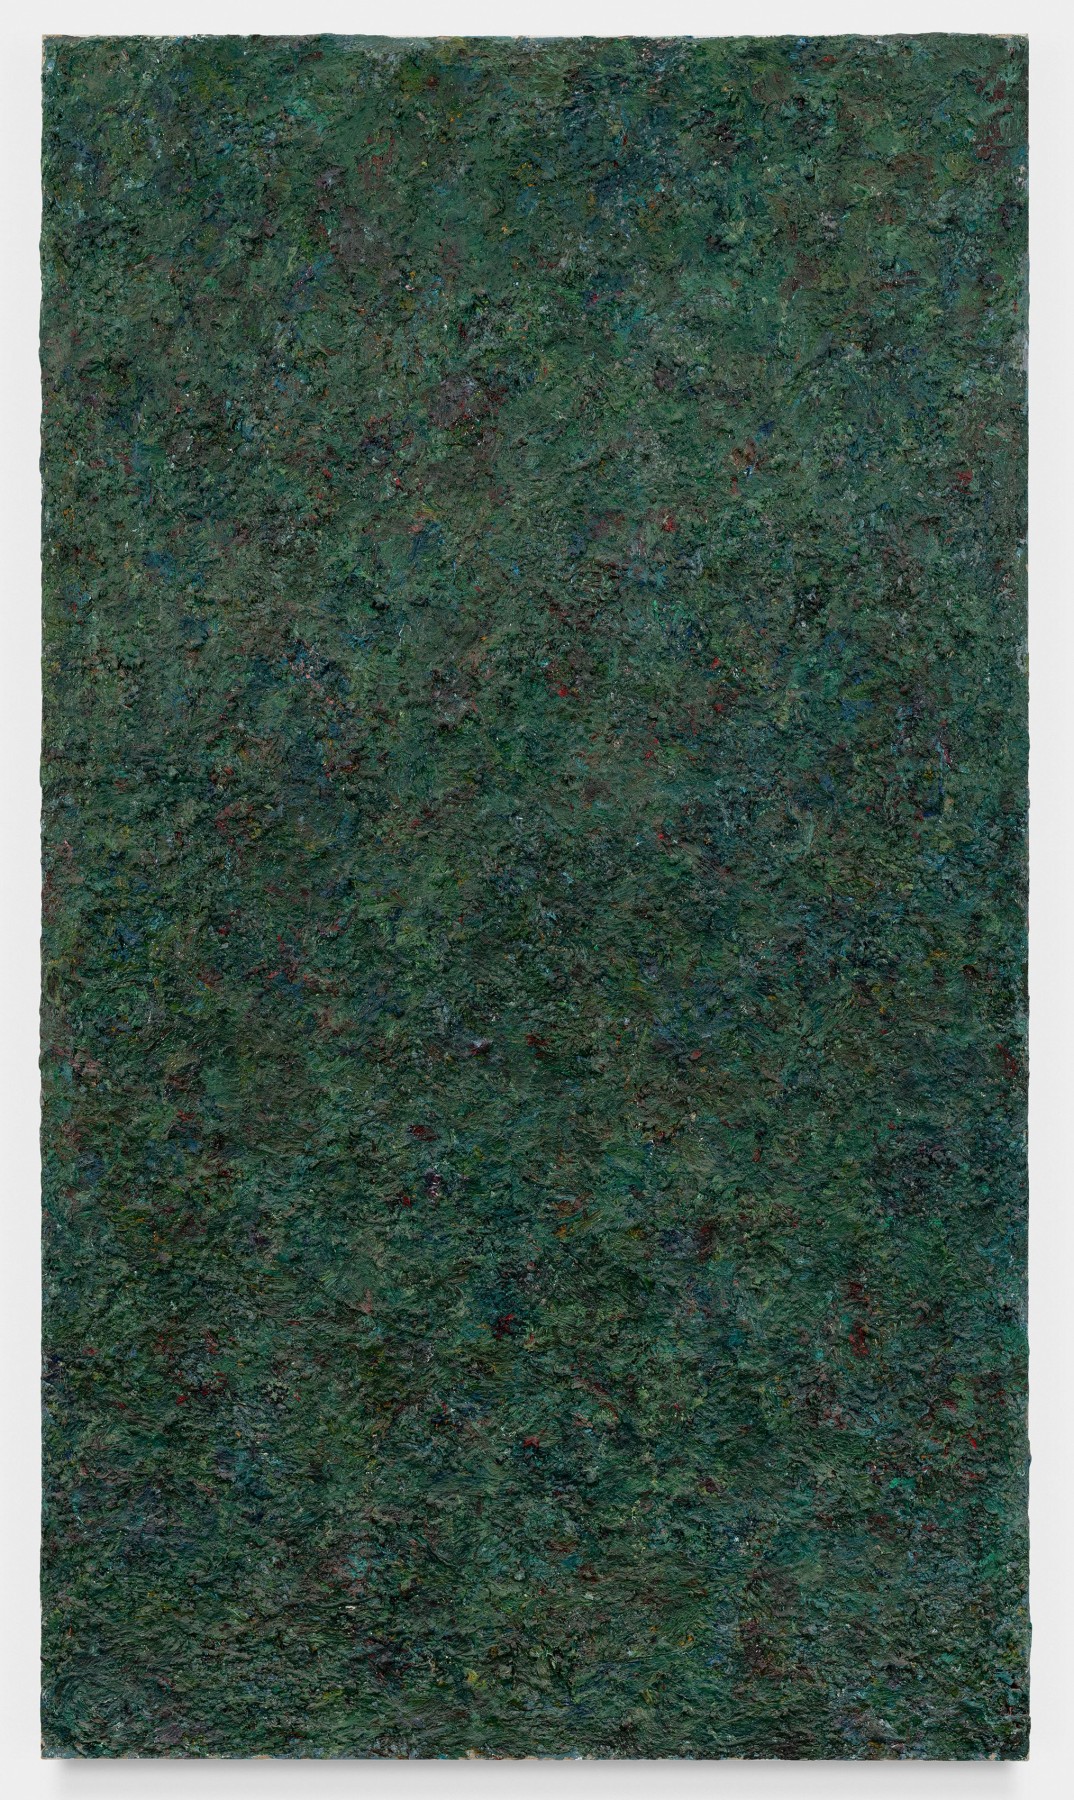 RS.28849 Resnick Untitled green abstract